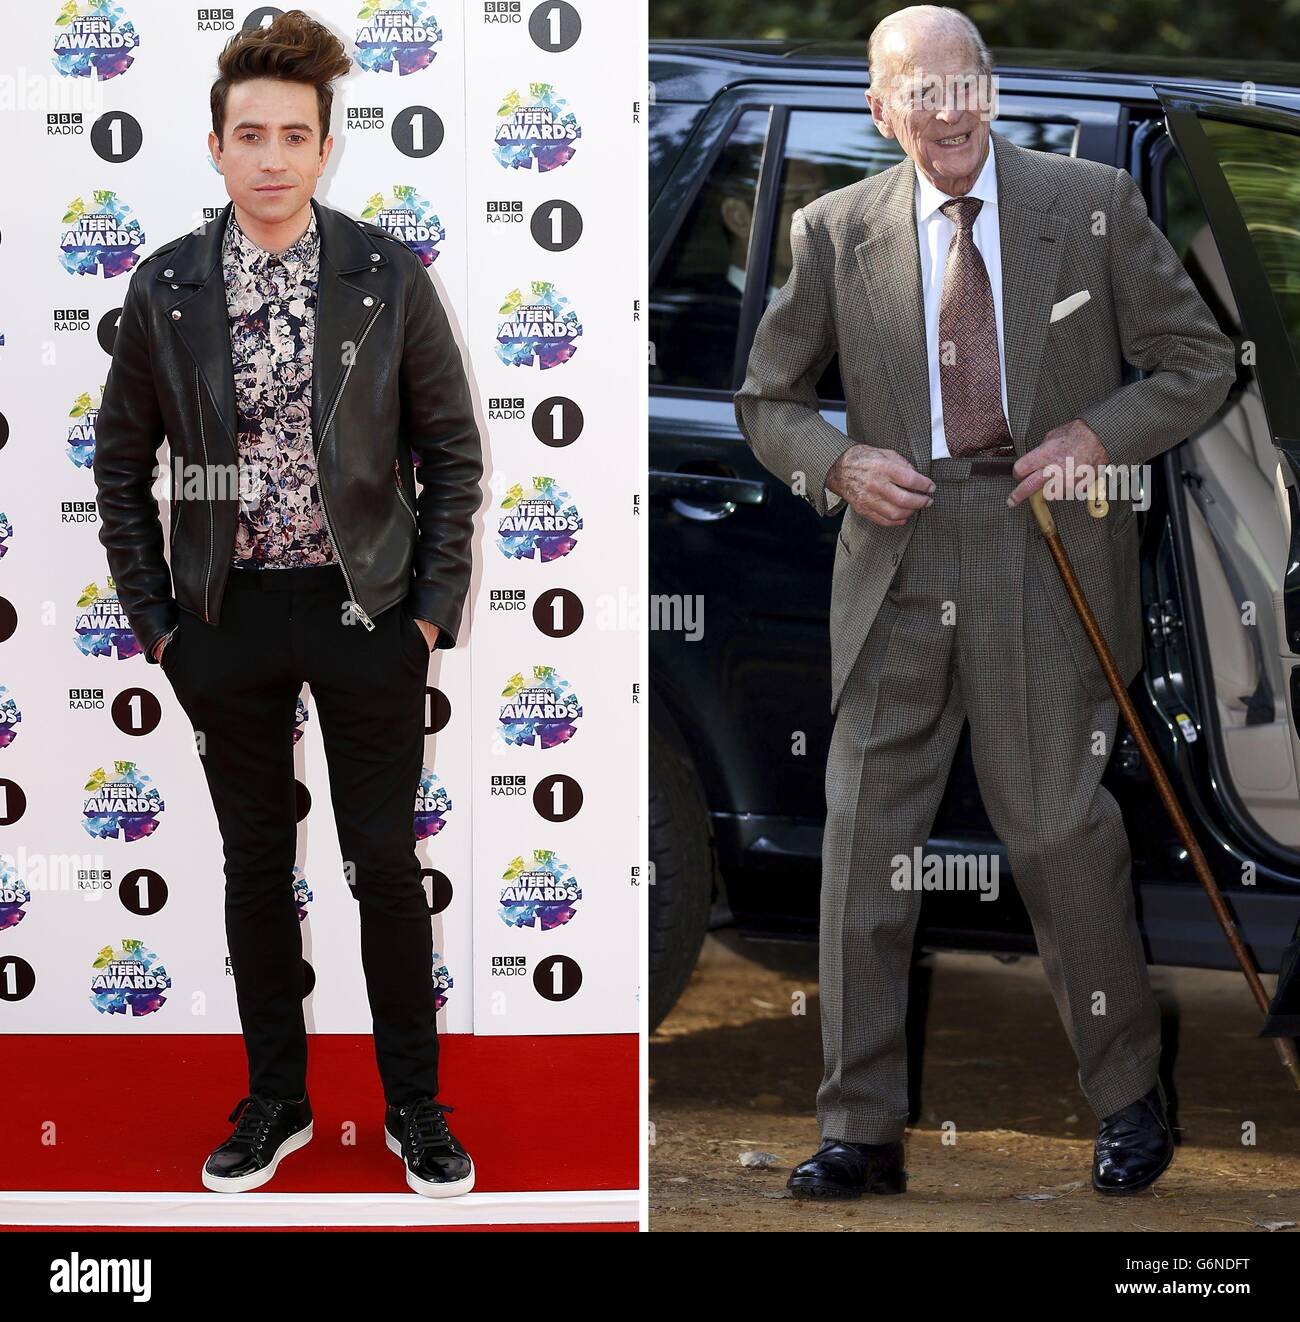 GQ's Best-Dressed Men List. Nick Grimshaw Best-Dressed Men List With The Radio 1 Dj Topping The Poll In London On December 30, 2013. Stock Photo